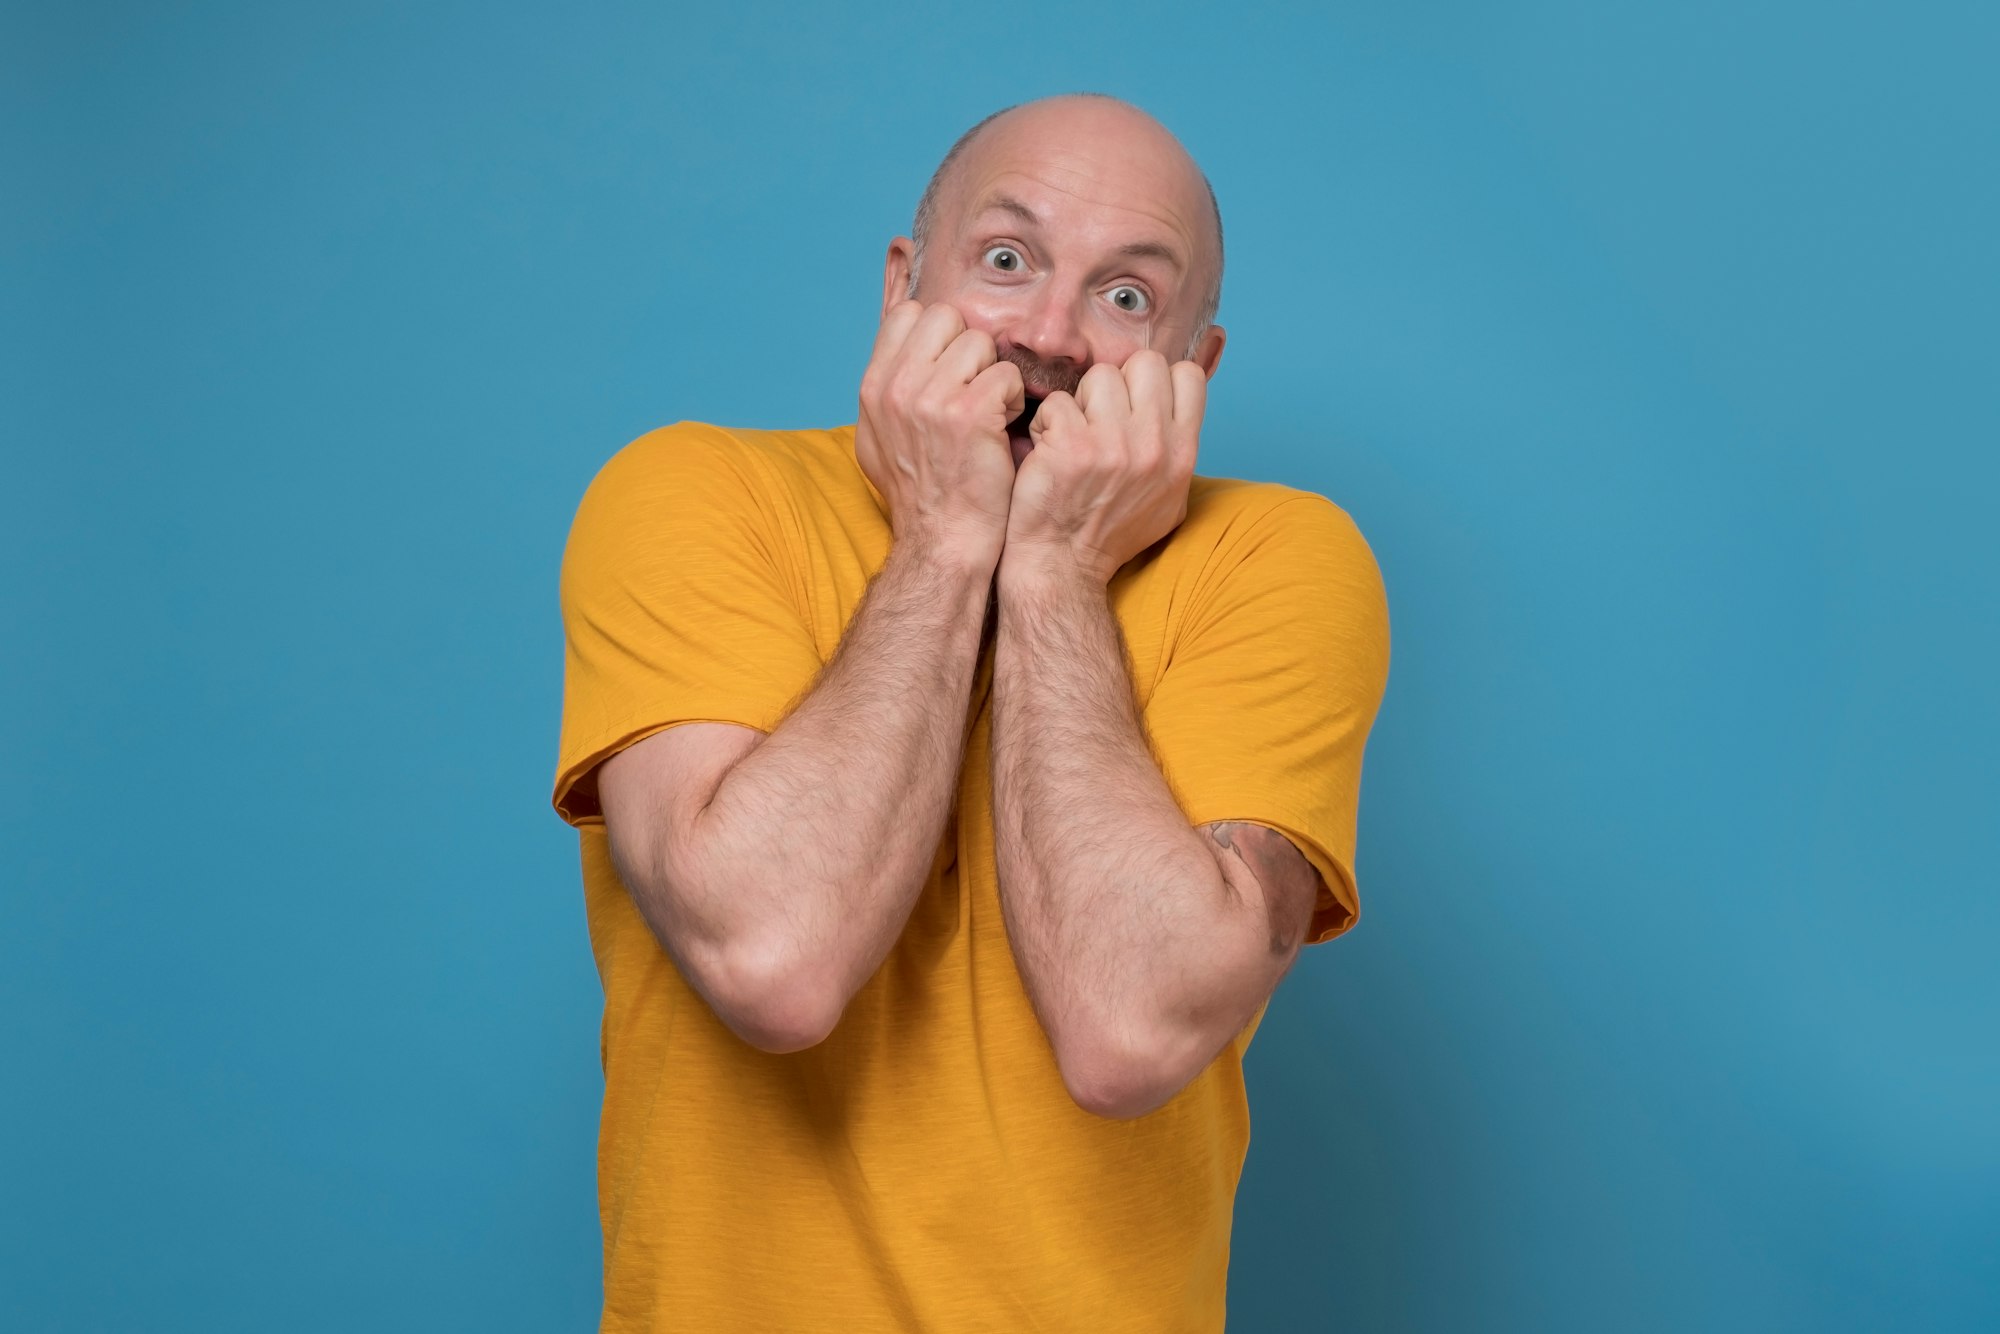 Mature man covering mouth with hands experiencing deep astonishment